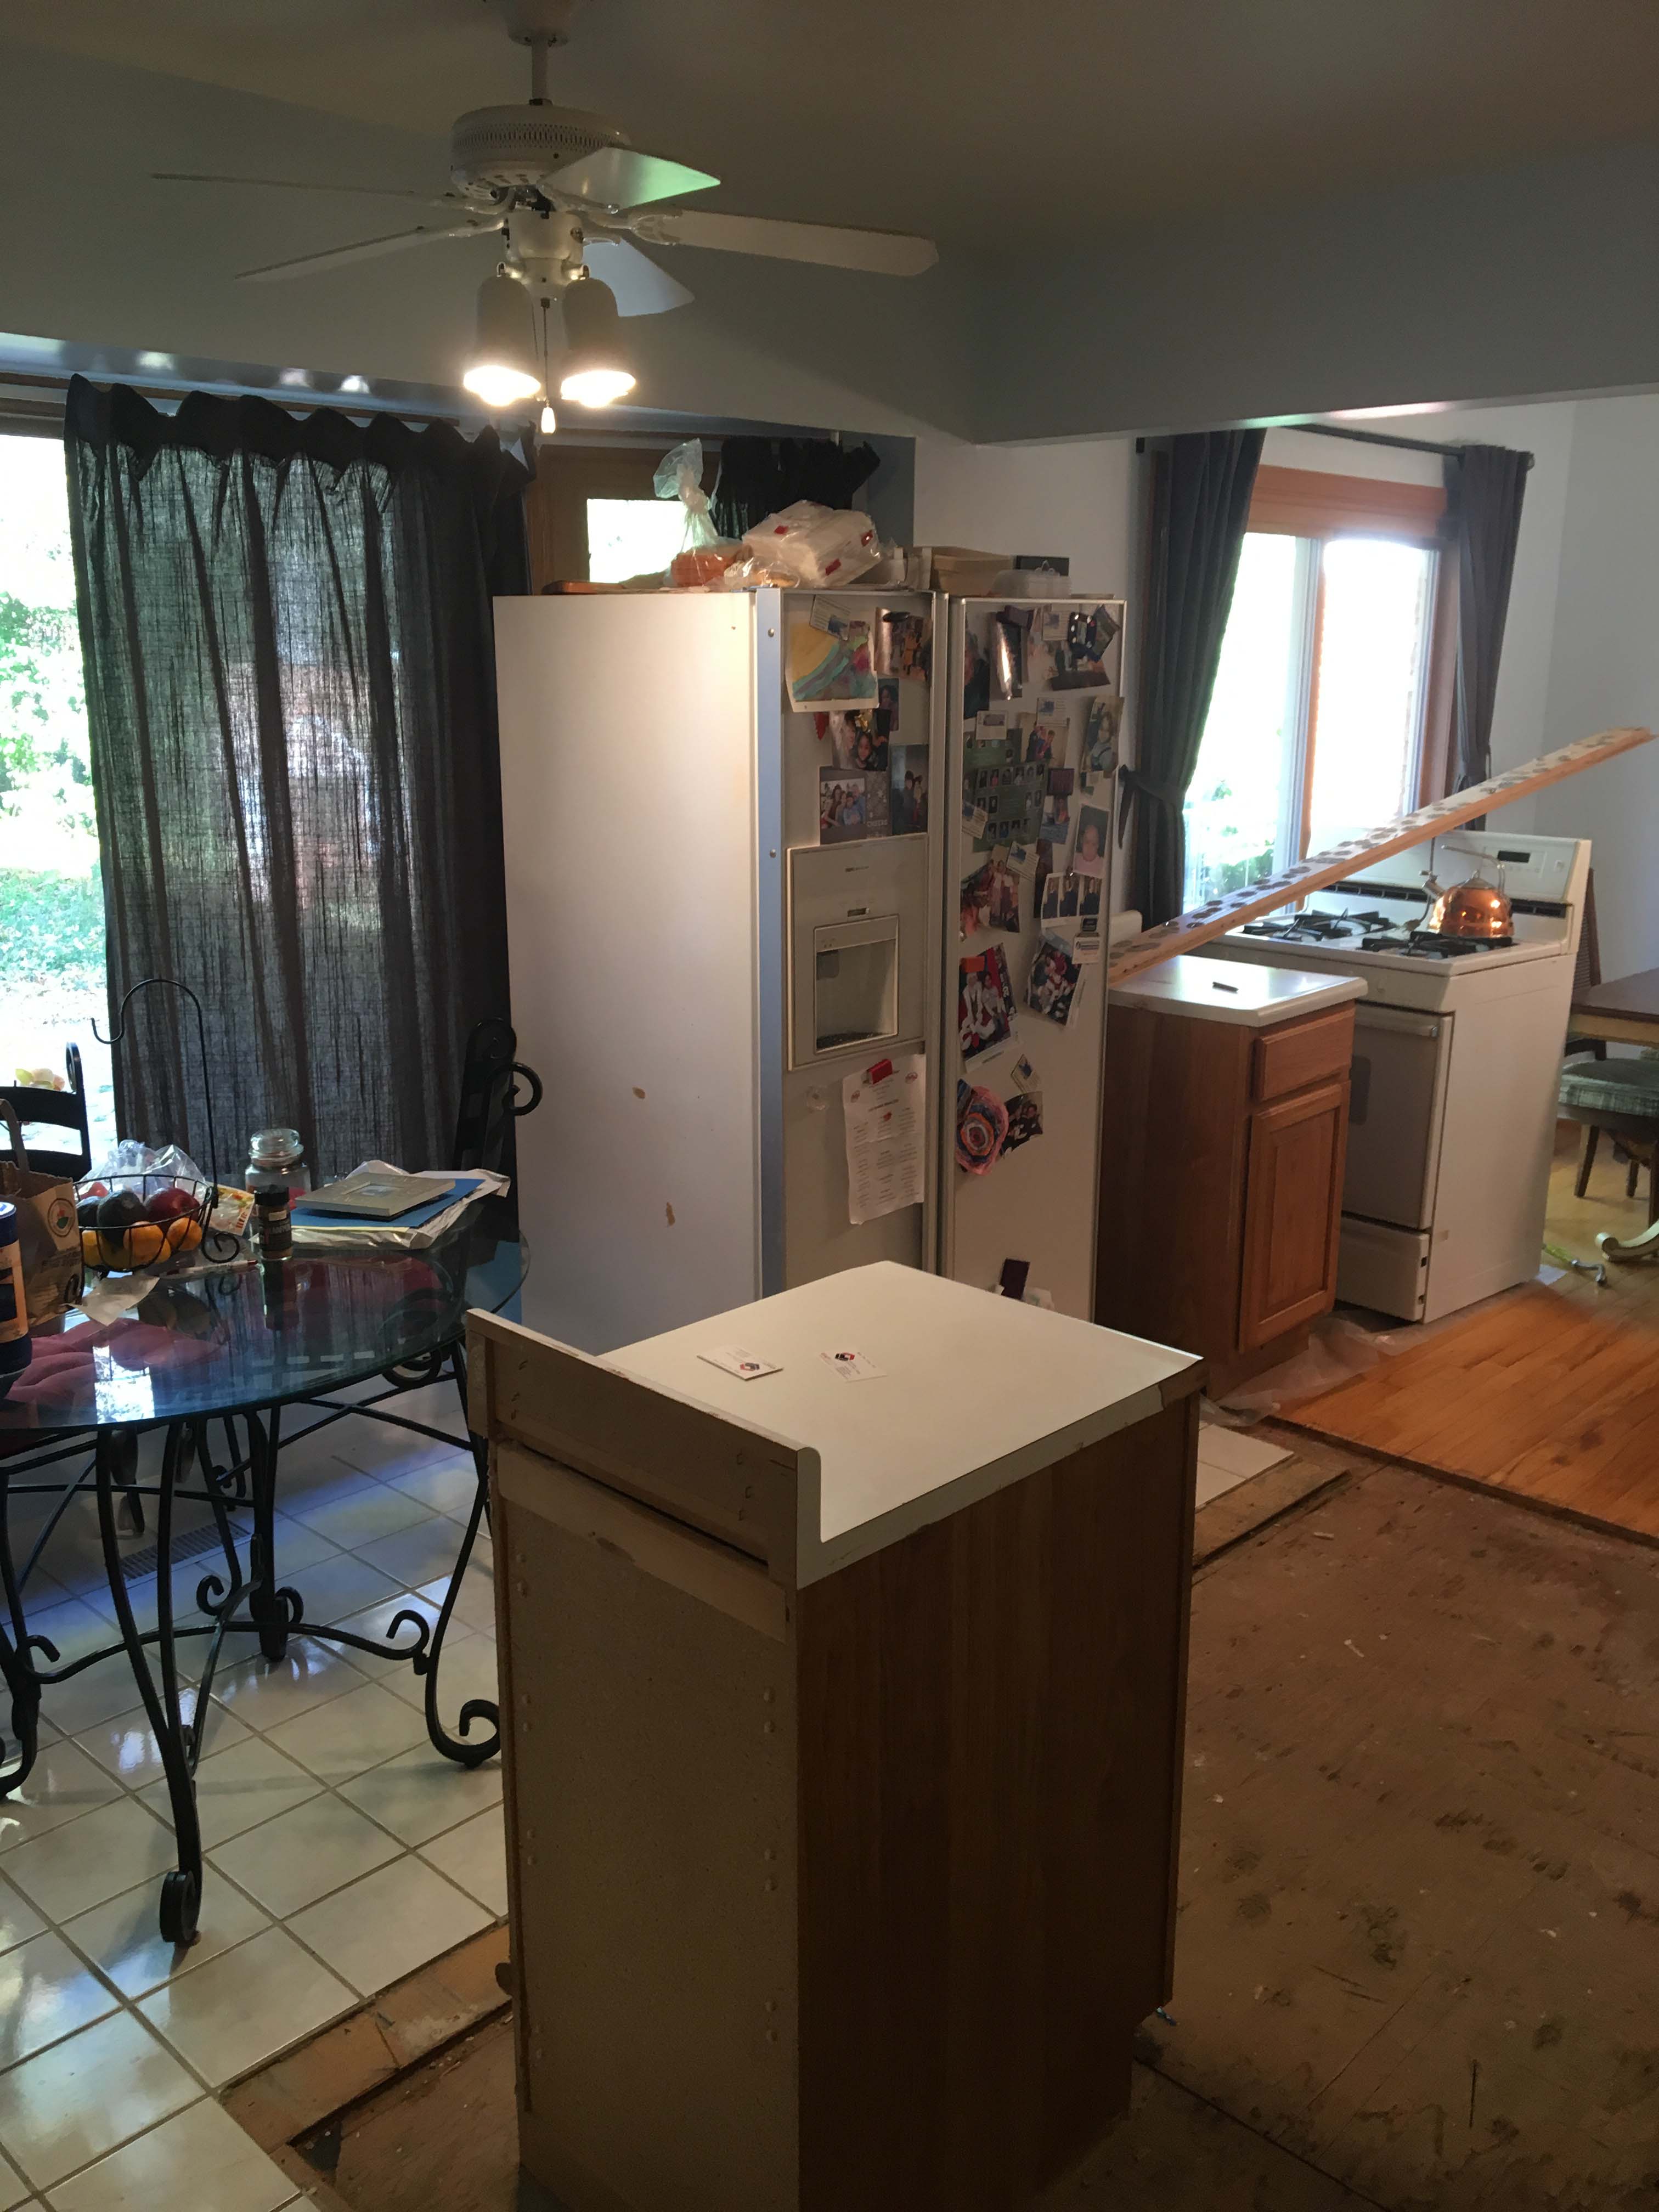 damaged wood kitchen floor with water and black mold